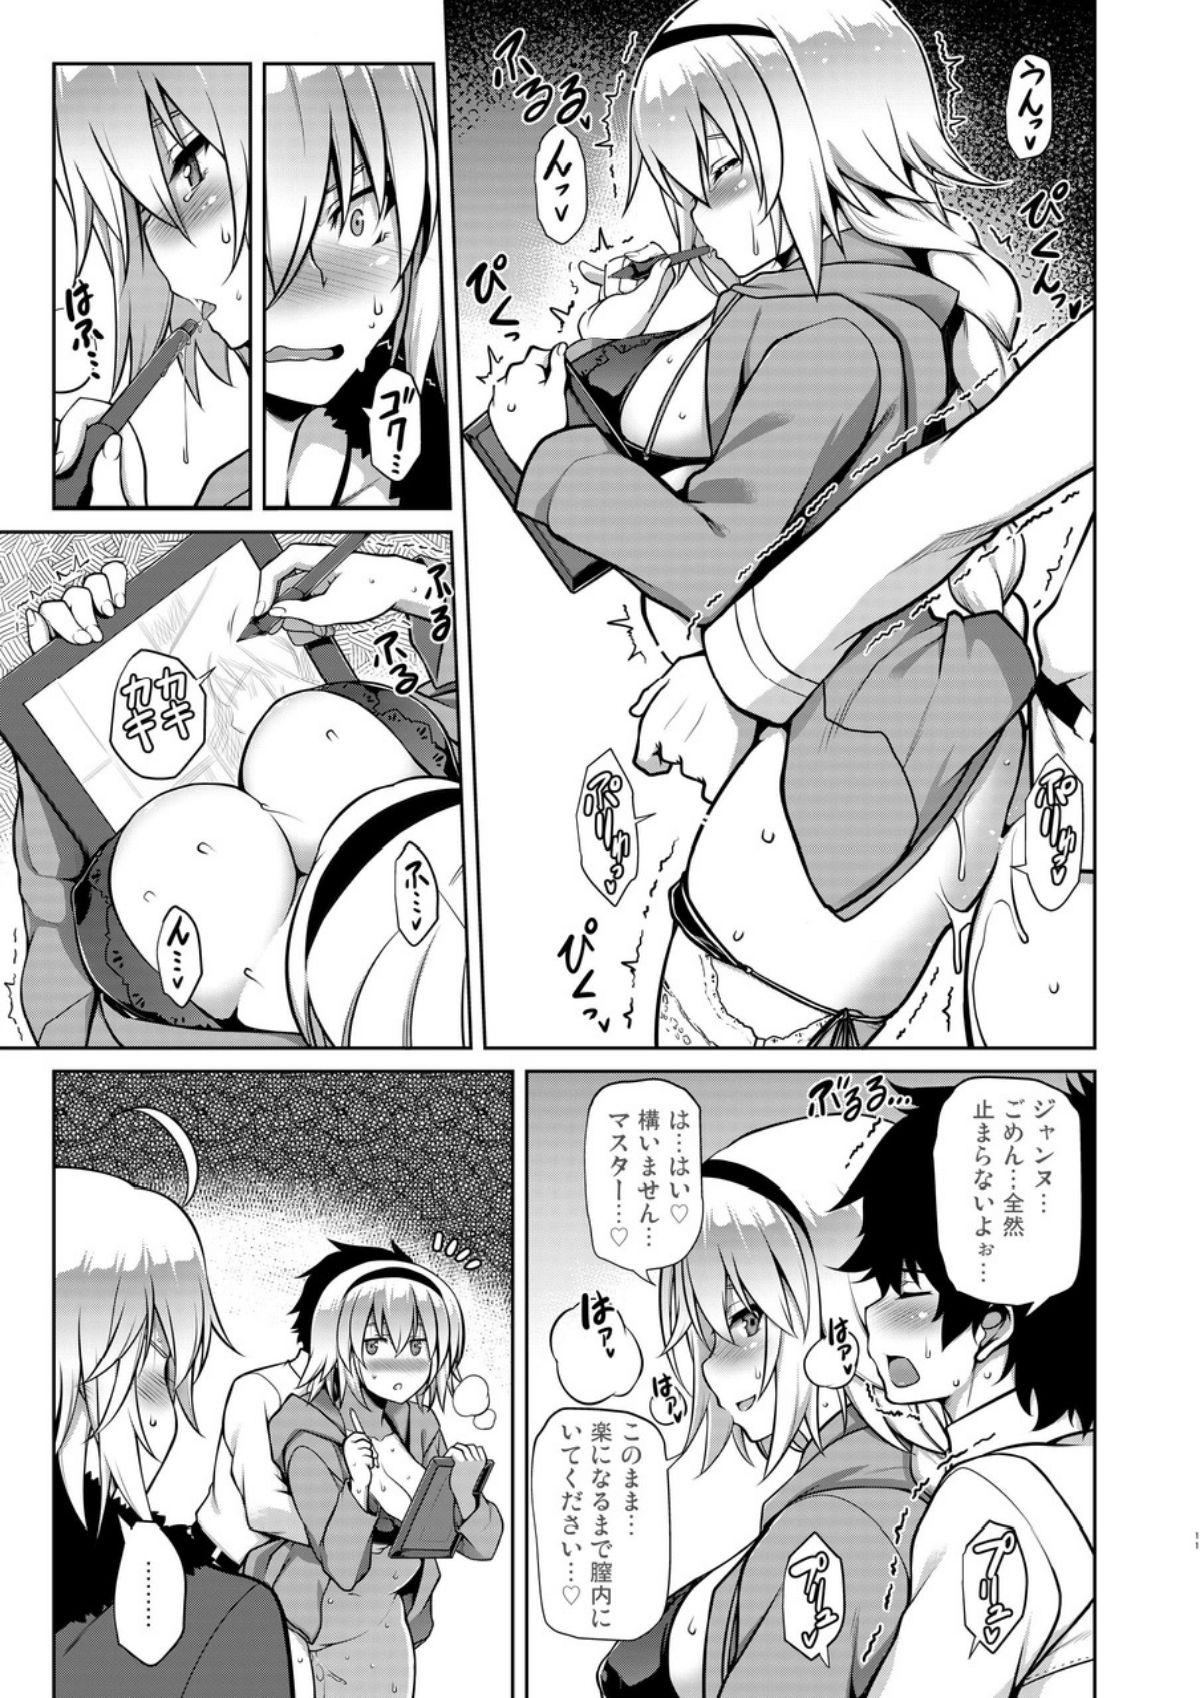 Bigcock Itezora no Summer Lady - Fate grand order Girls Getting Fucked - Page 10